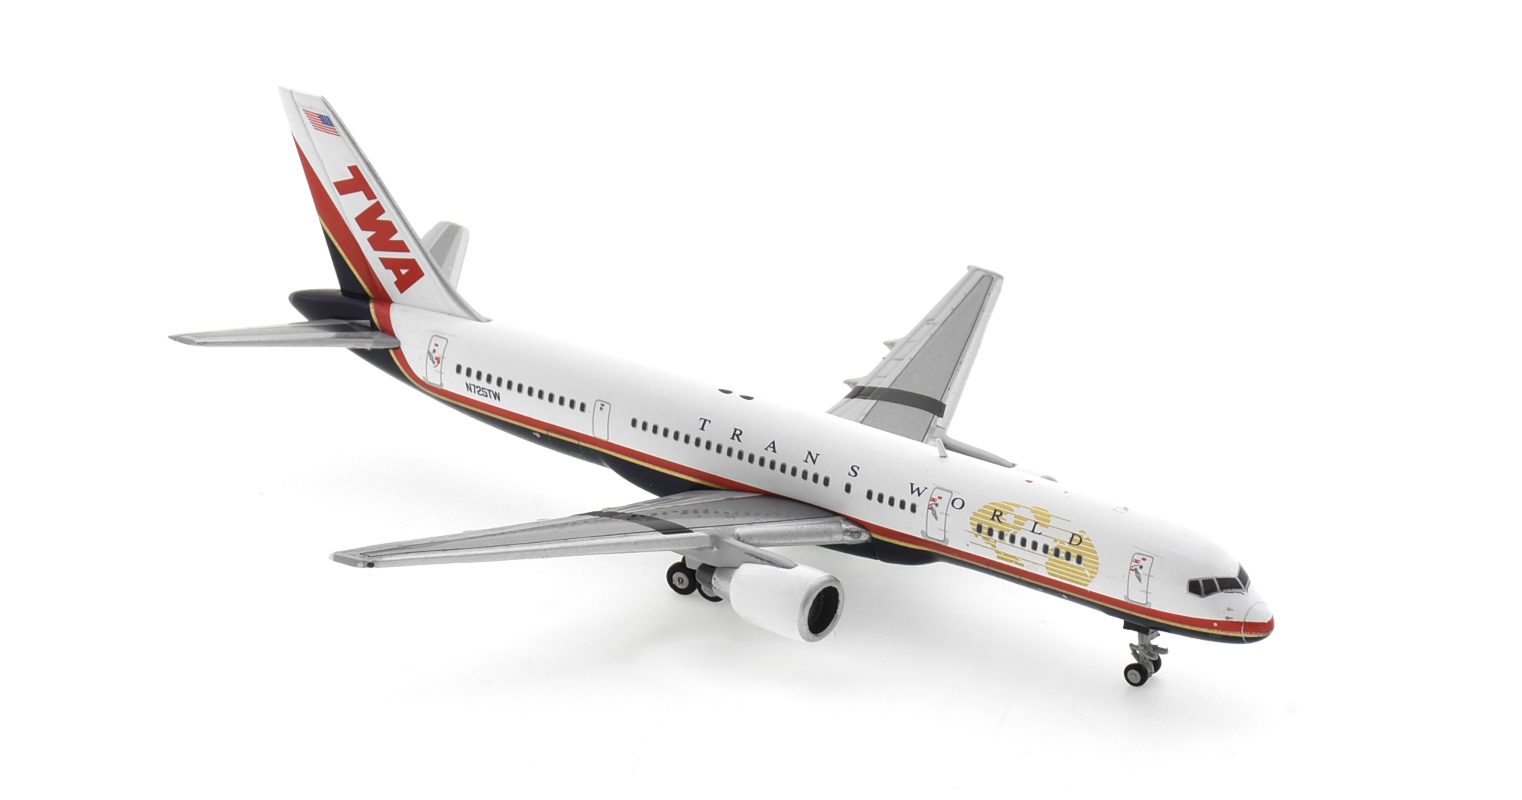 Front starboard side3 view of Gemini Jets GJTWA1982 - 1/200 scale diecast model of the Boeing 757-200 registration N725TW in TWA's final livery, circa 2000.